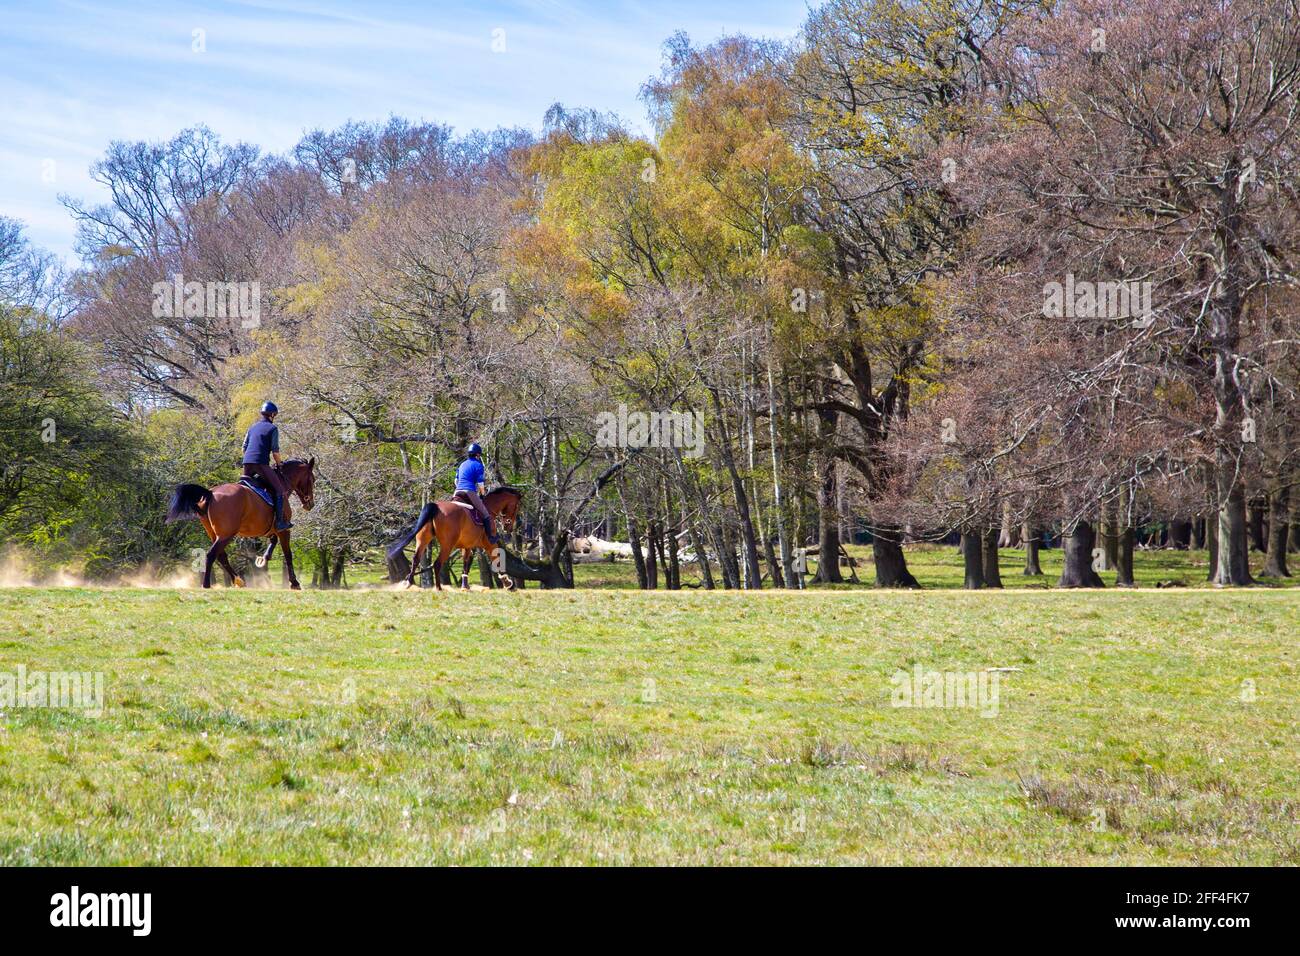 People riding horses near the Long Walk in Windsor Great Park, Windsor, UK Stock Photo